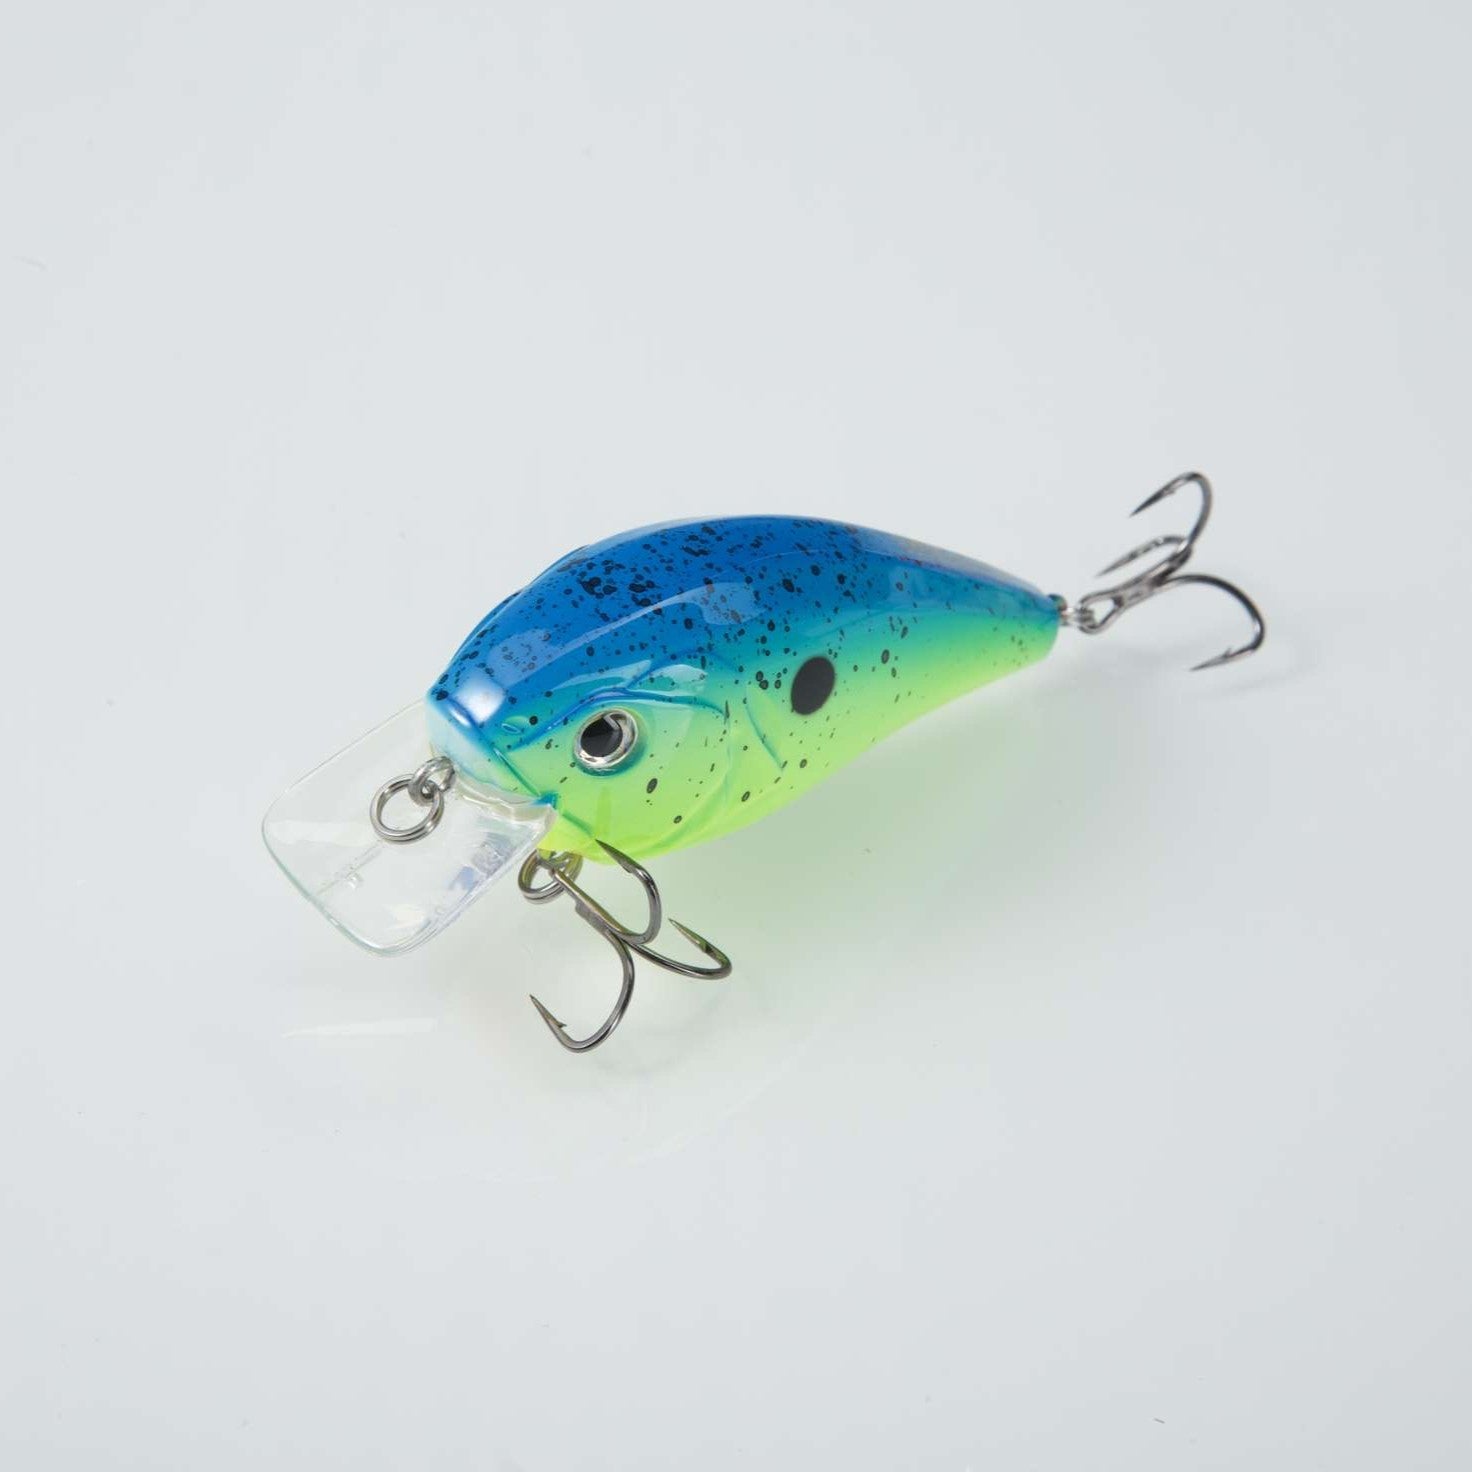 Lurch's Lures - Some new colors ( blue craw and morning dawn) as well as a  new ned craw. Knoxville is just few days away.